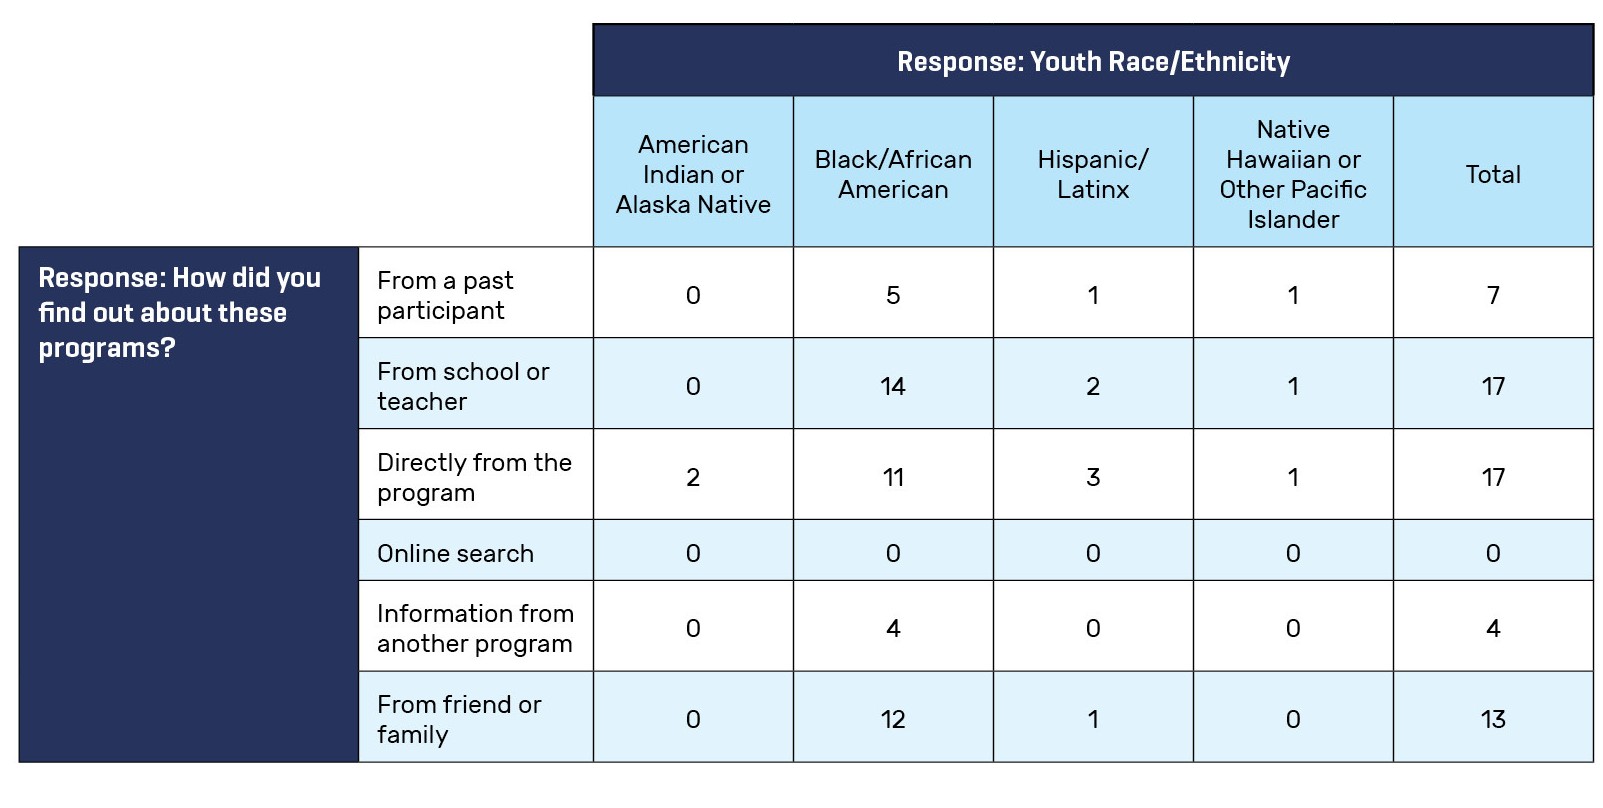 Table 2. Youth Response